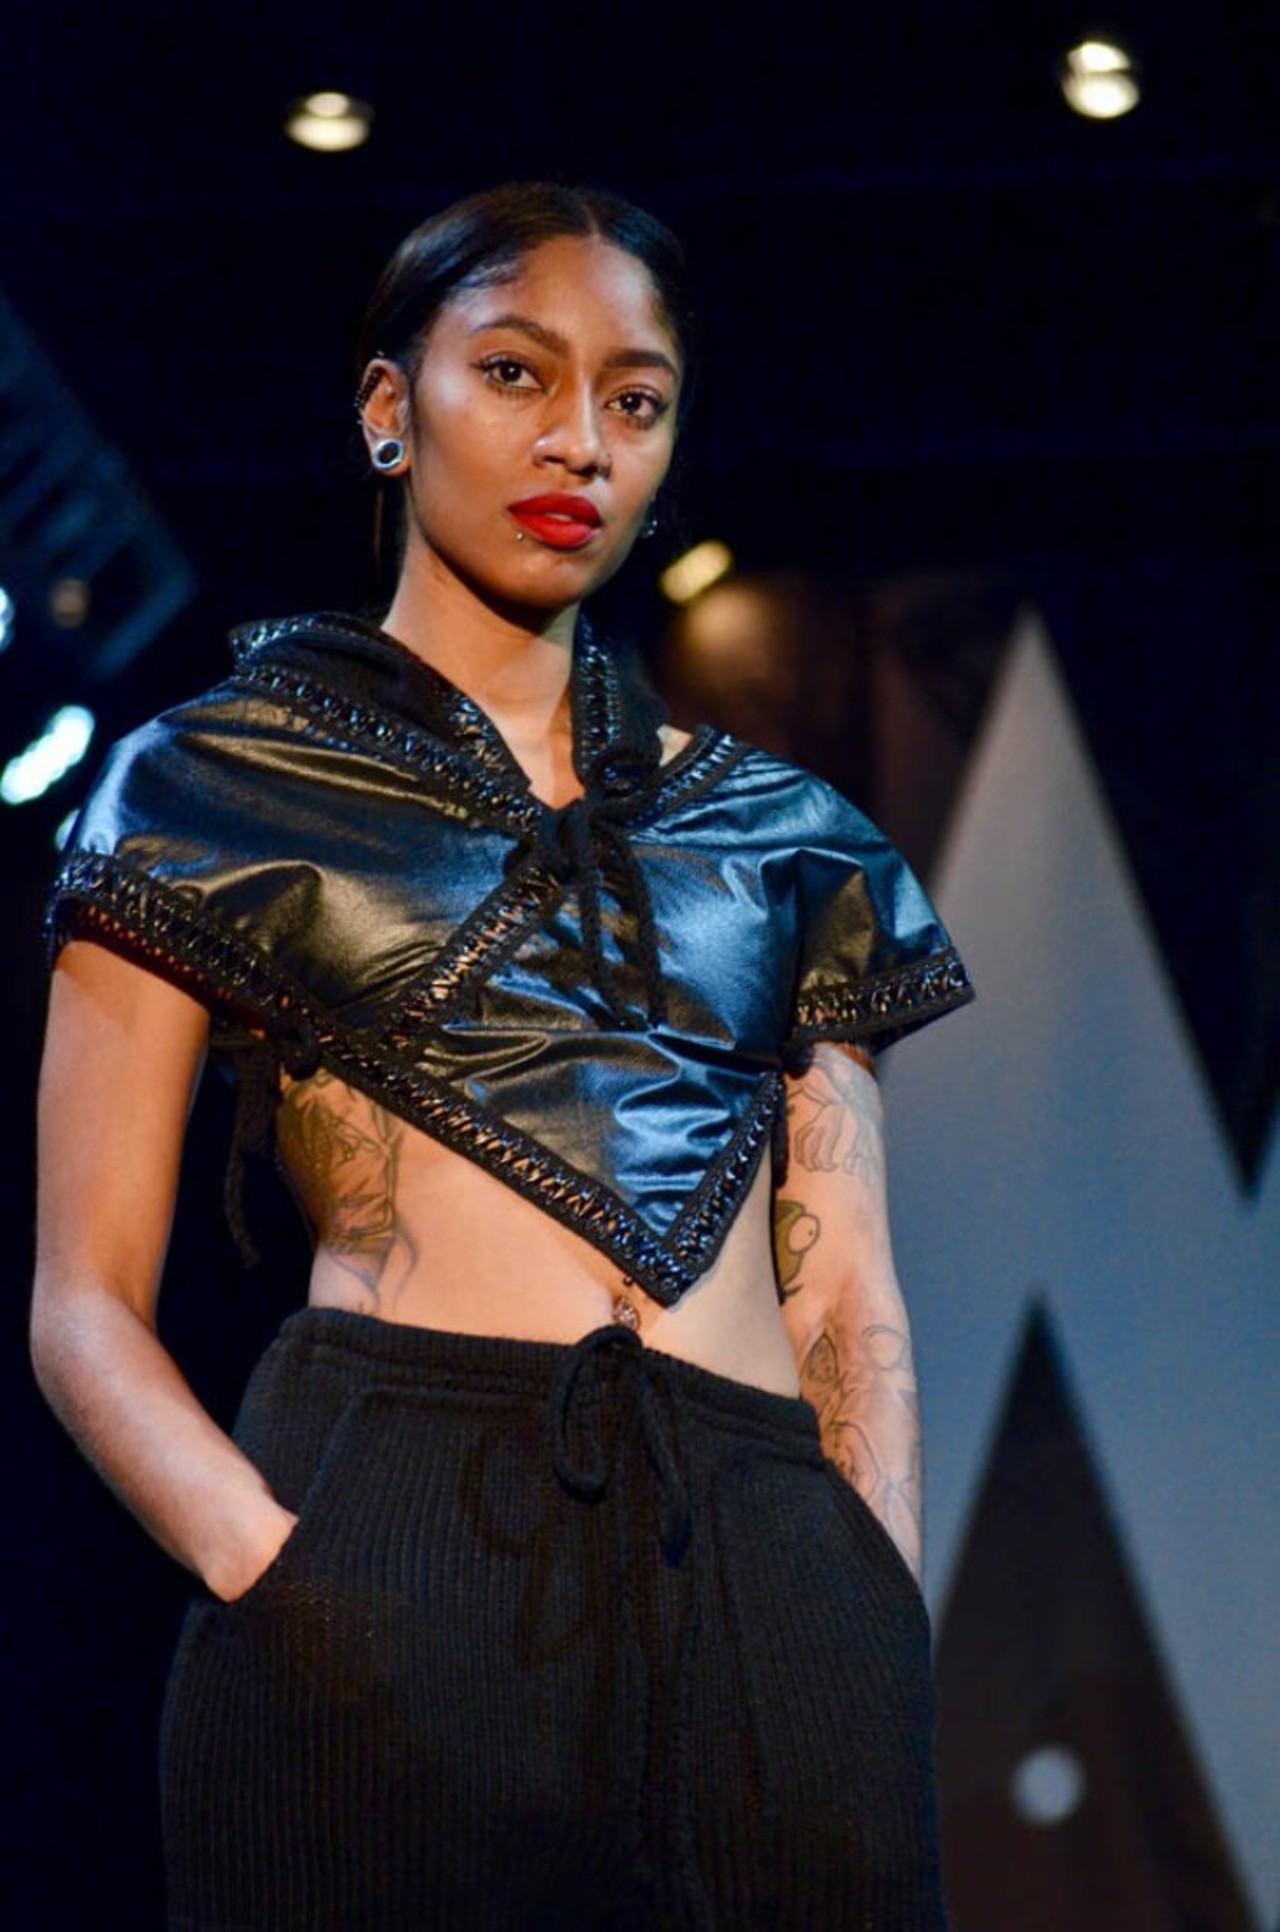 All the looks served at the Walk Fashion Show in Detroit